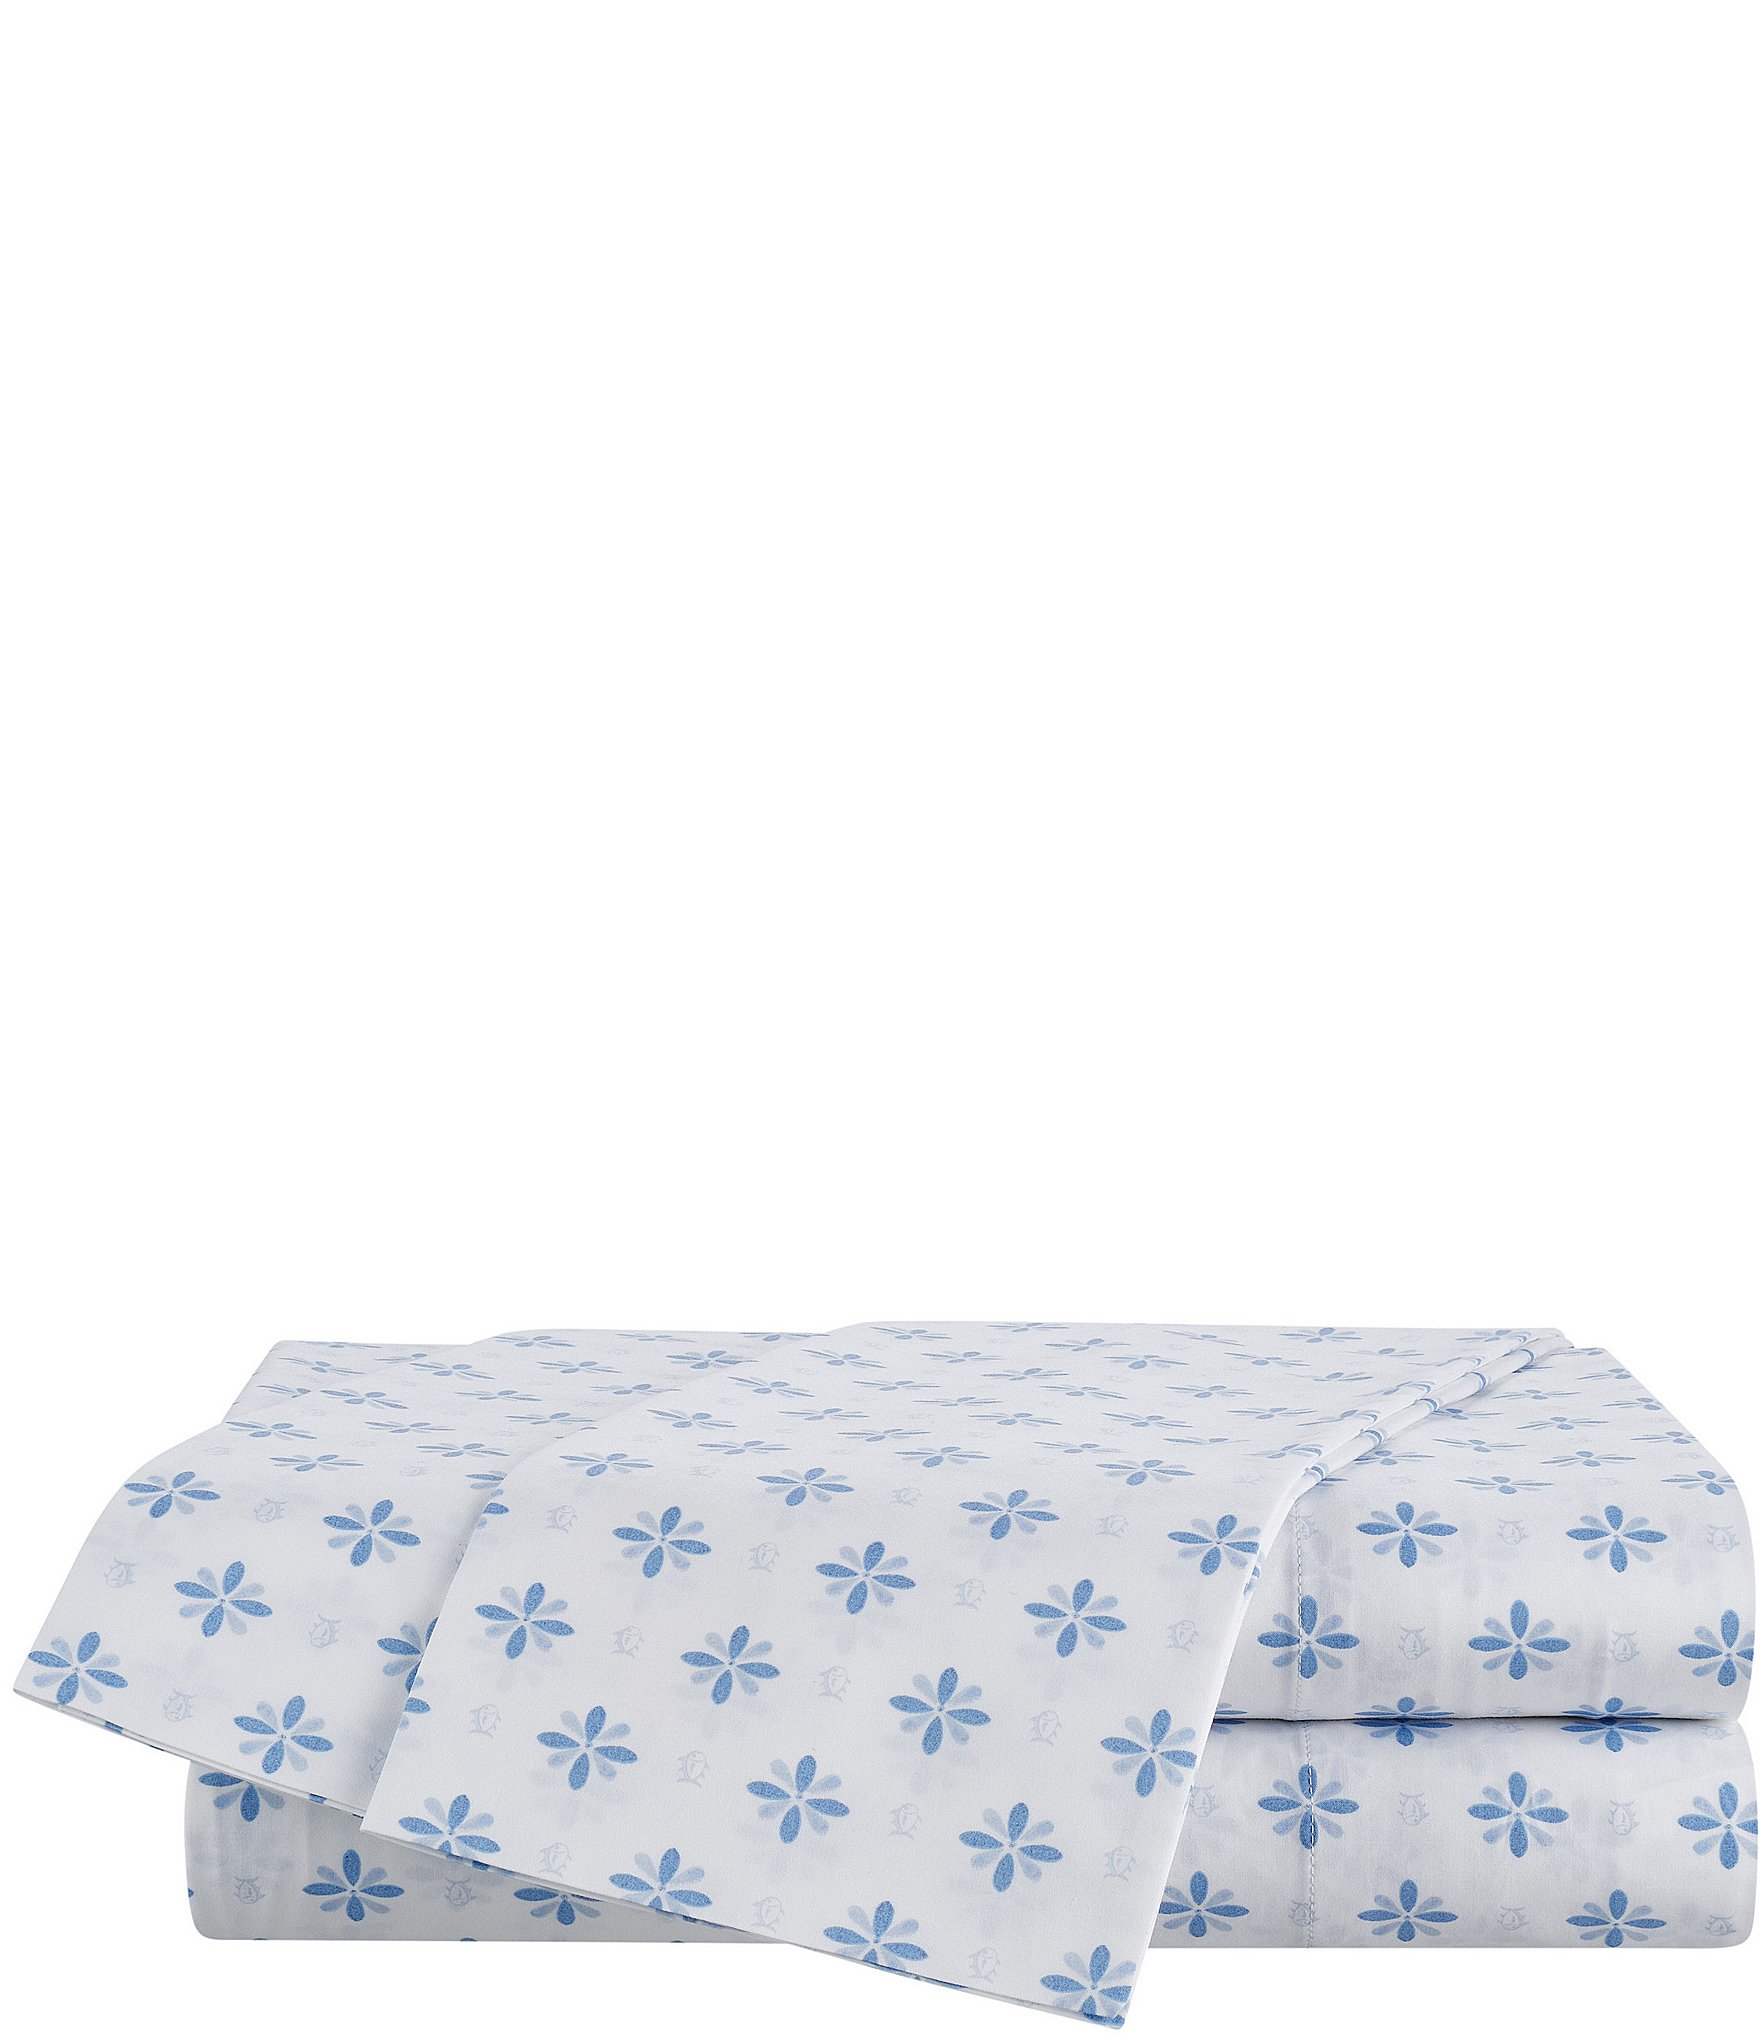 BRAND NEW SOUTHERN TIDE PINK QUEEN SHEET SET  SKIPJACK COLLECTION 